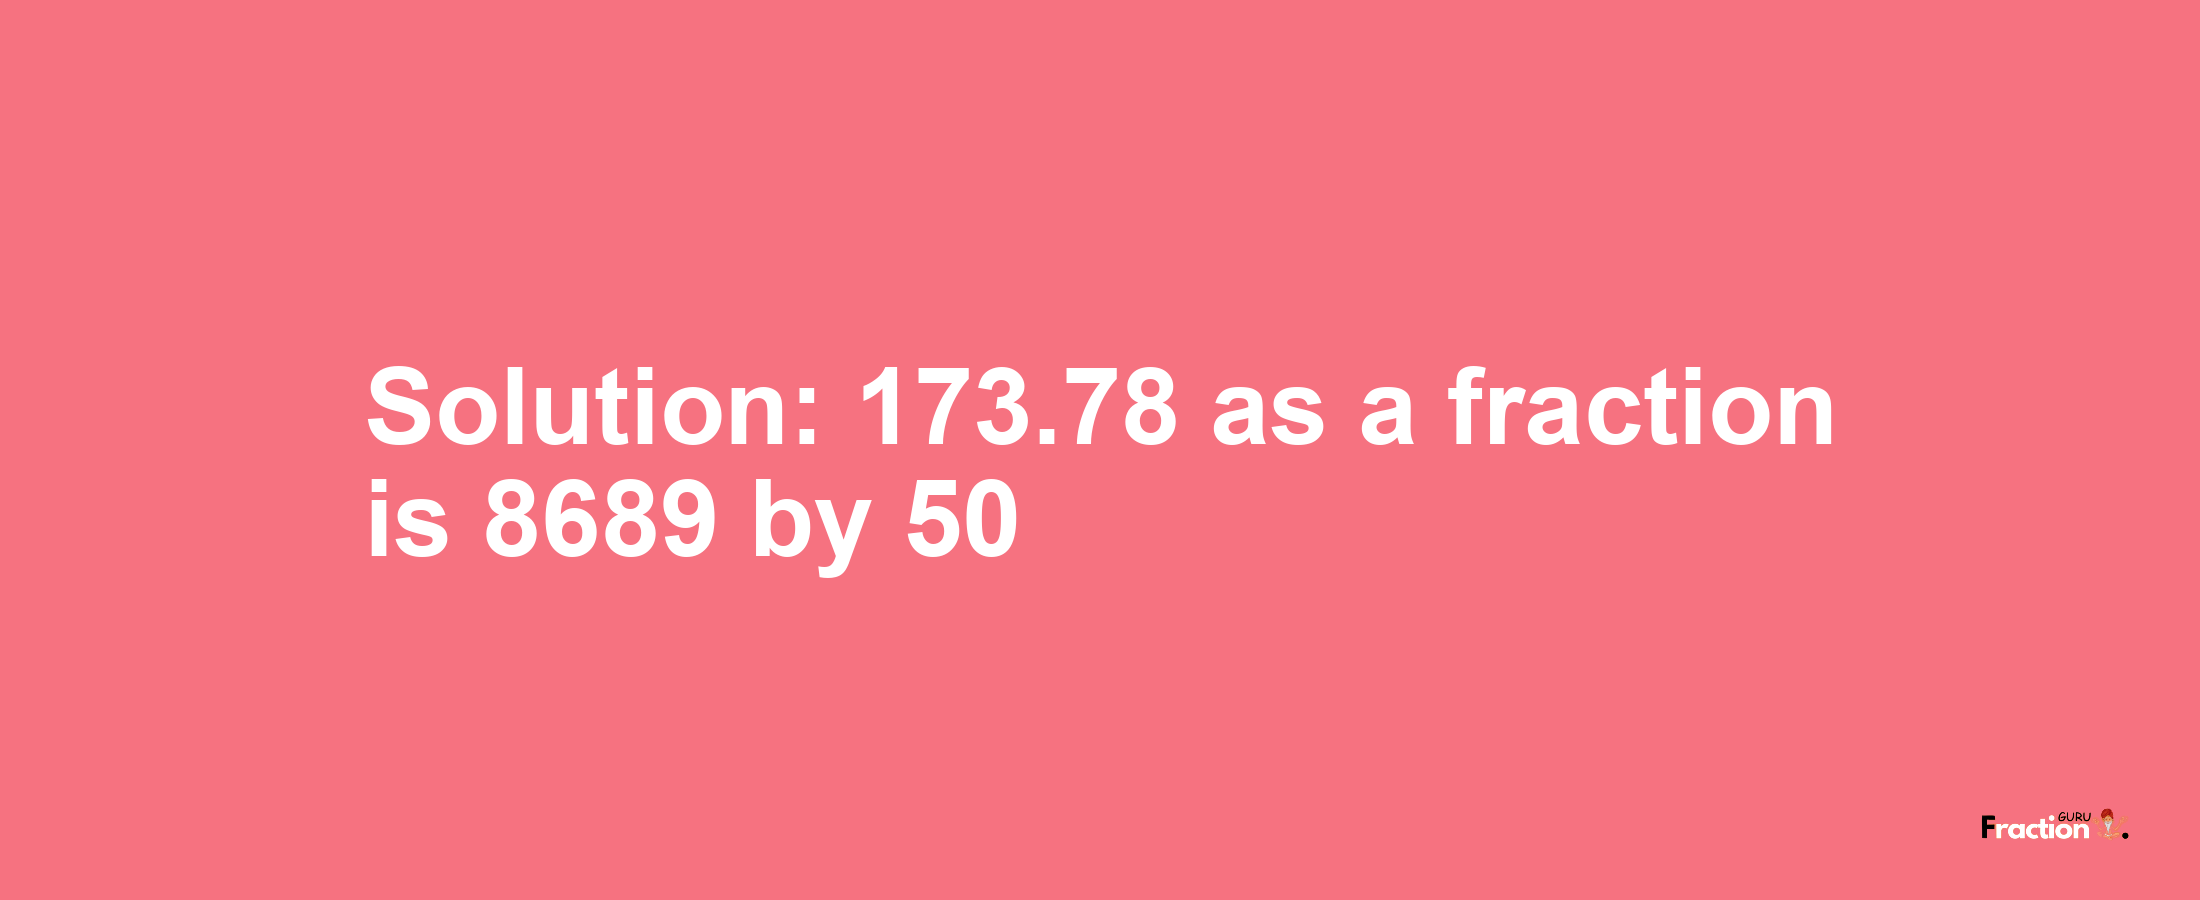 Solution:173.78 as a fraction is 8689/50